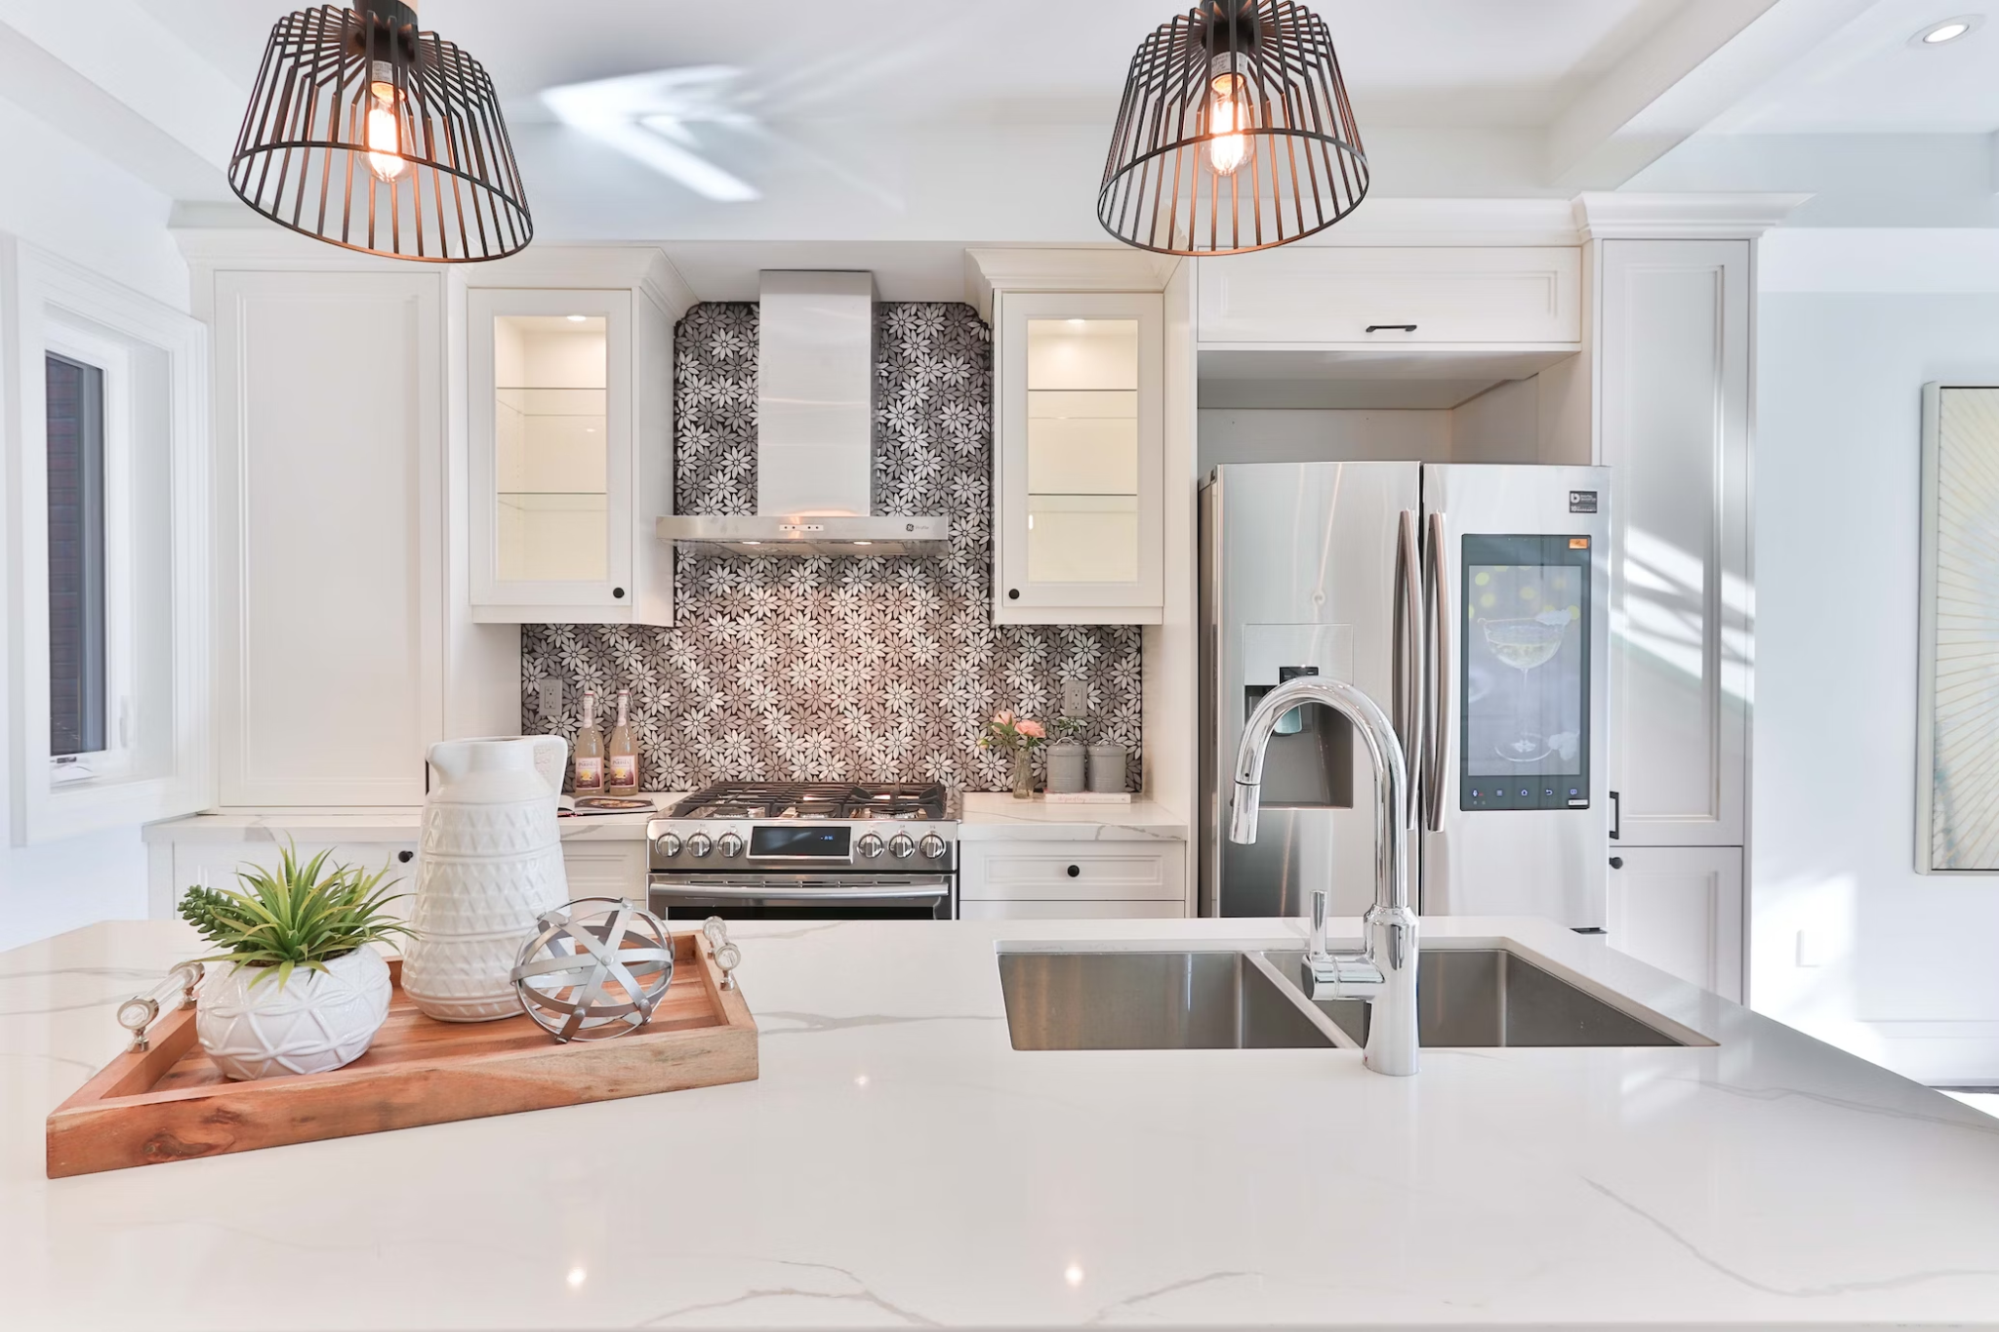 Bright kitchen ideas – tips and tricks on how to illuminate your cooking space with style, 2, eurocraftswfl.com